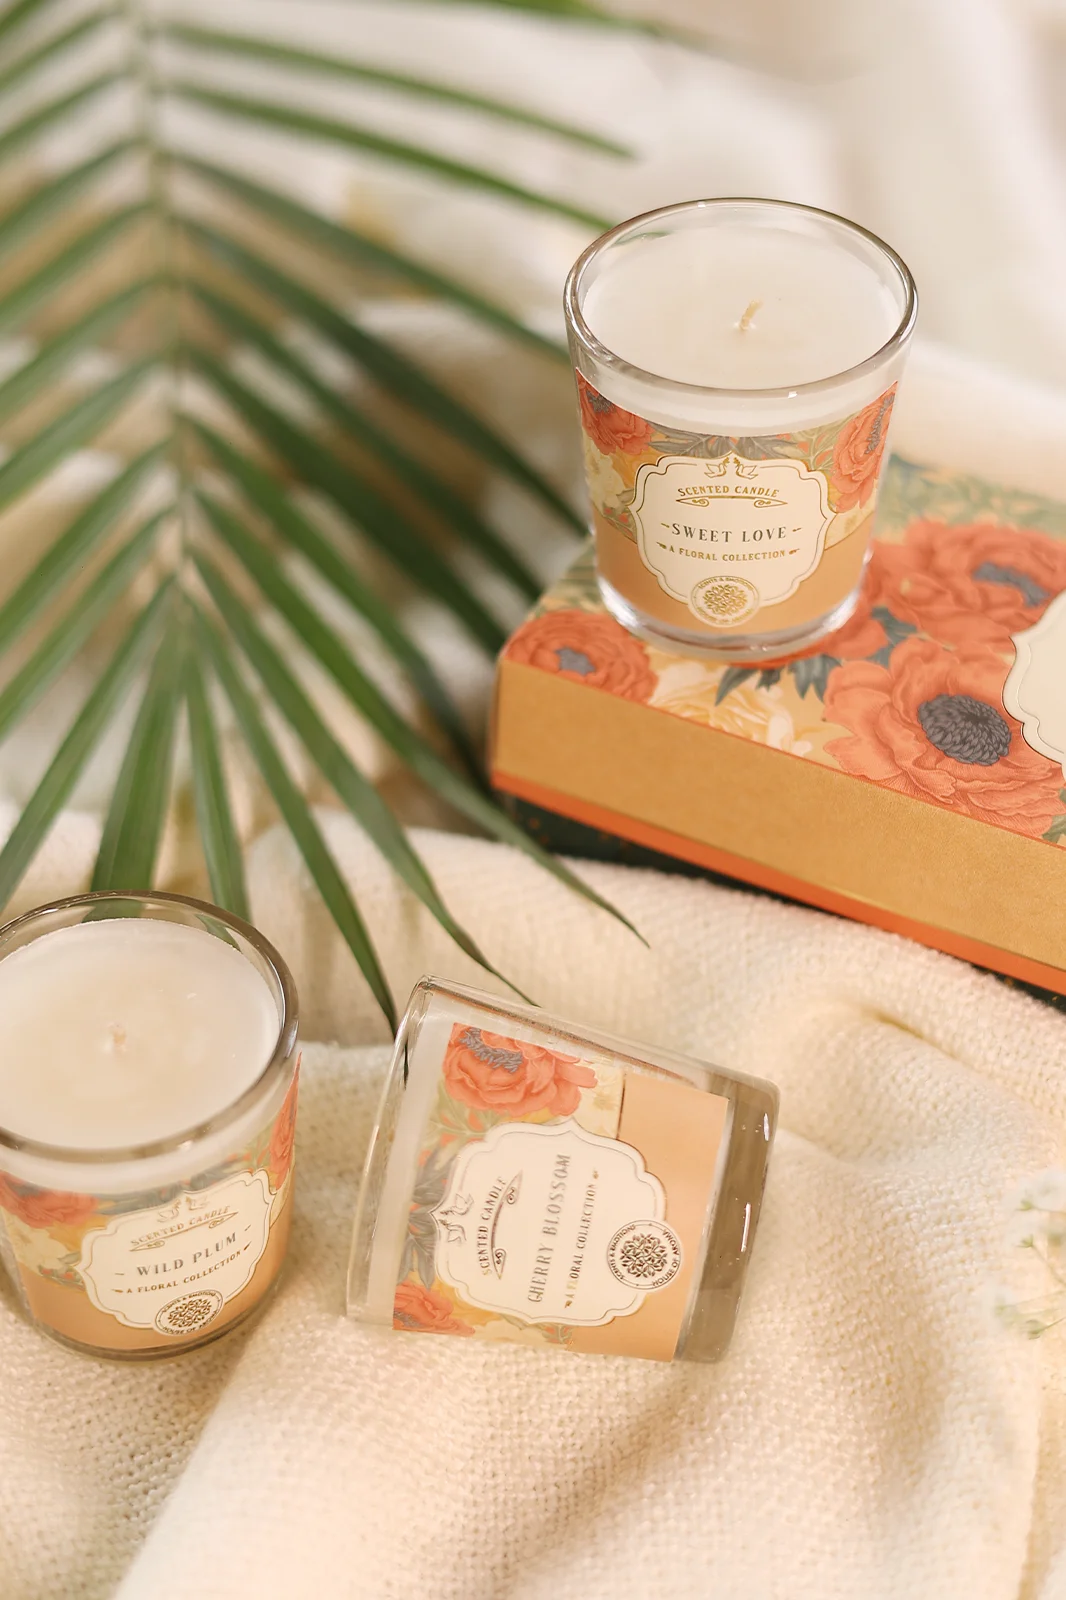 Enchanted garden scented candle gift set, Scented candles gift set, Gift set, Candle for gifting, Candle gift set, gift scented candles, decor candles, garden scented candle, aroma candles, candle gift, enchanted garden, soy wax candle gift set, wax candles, house of aroma